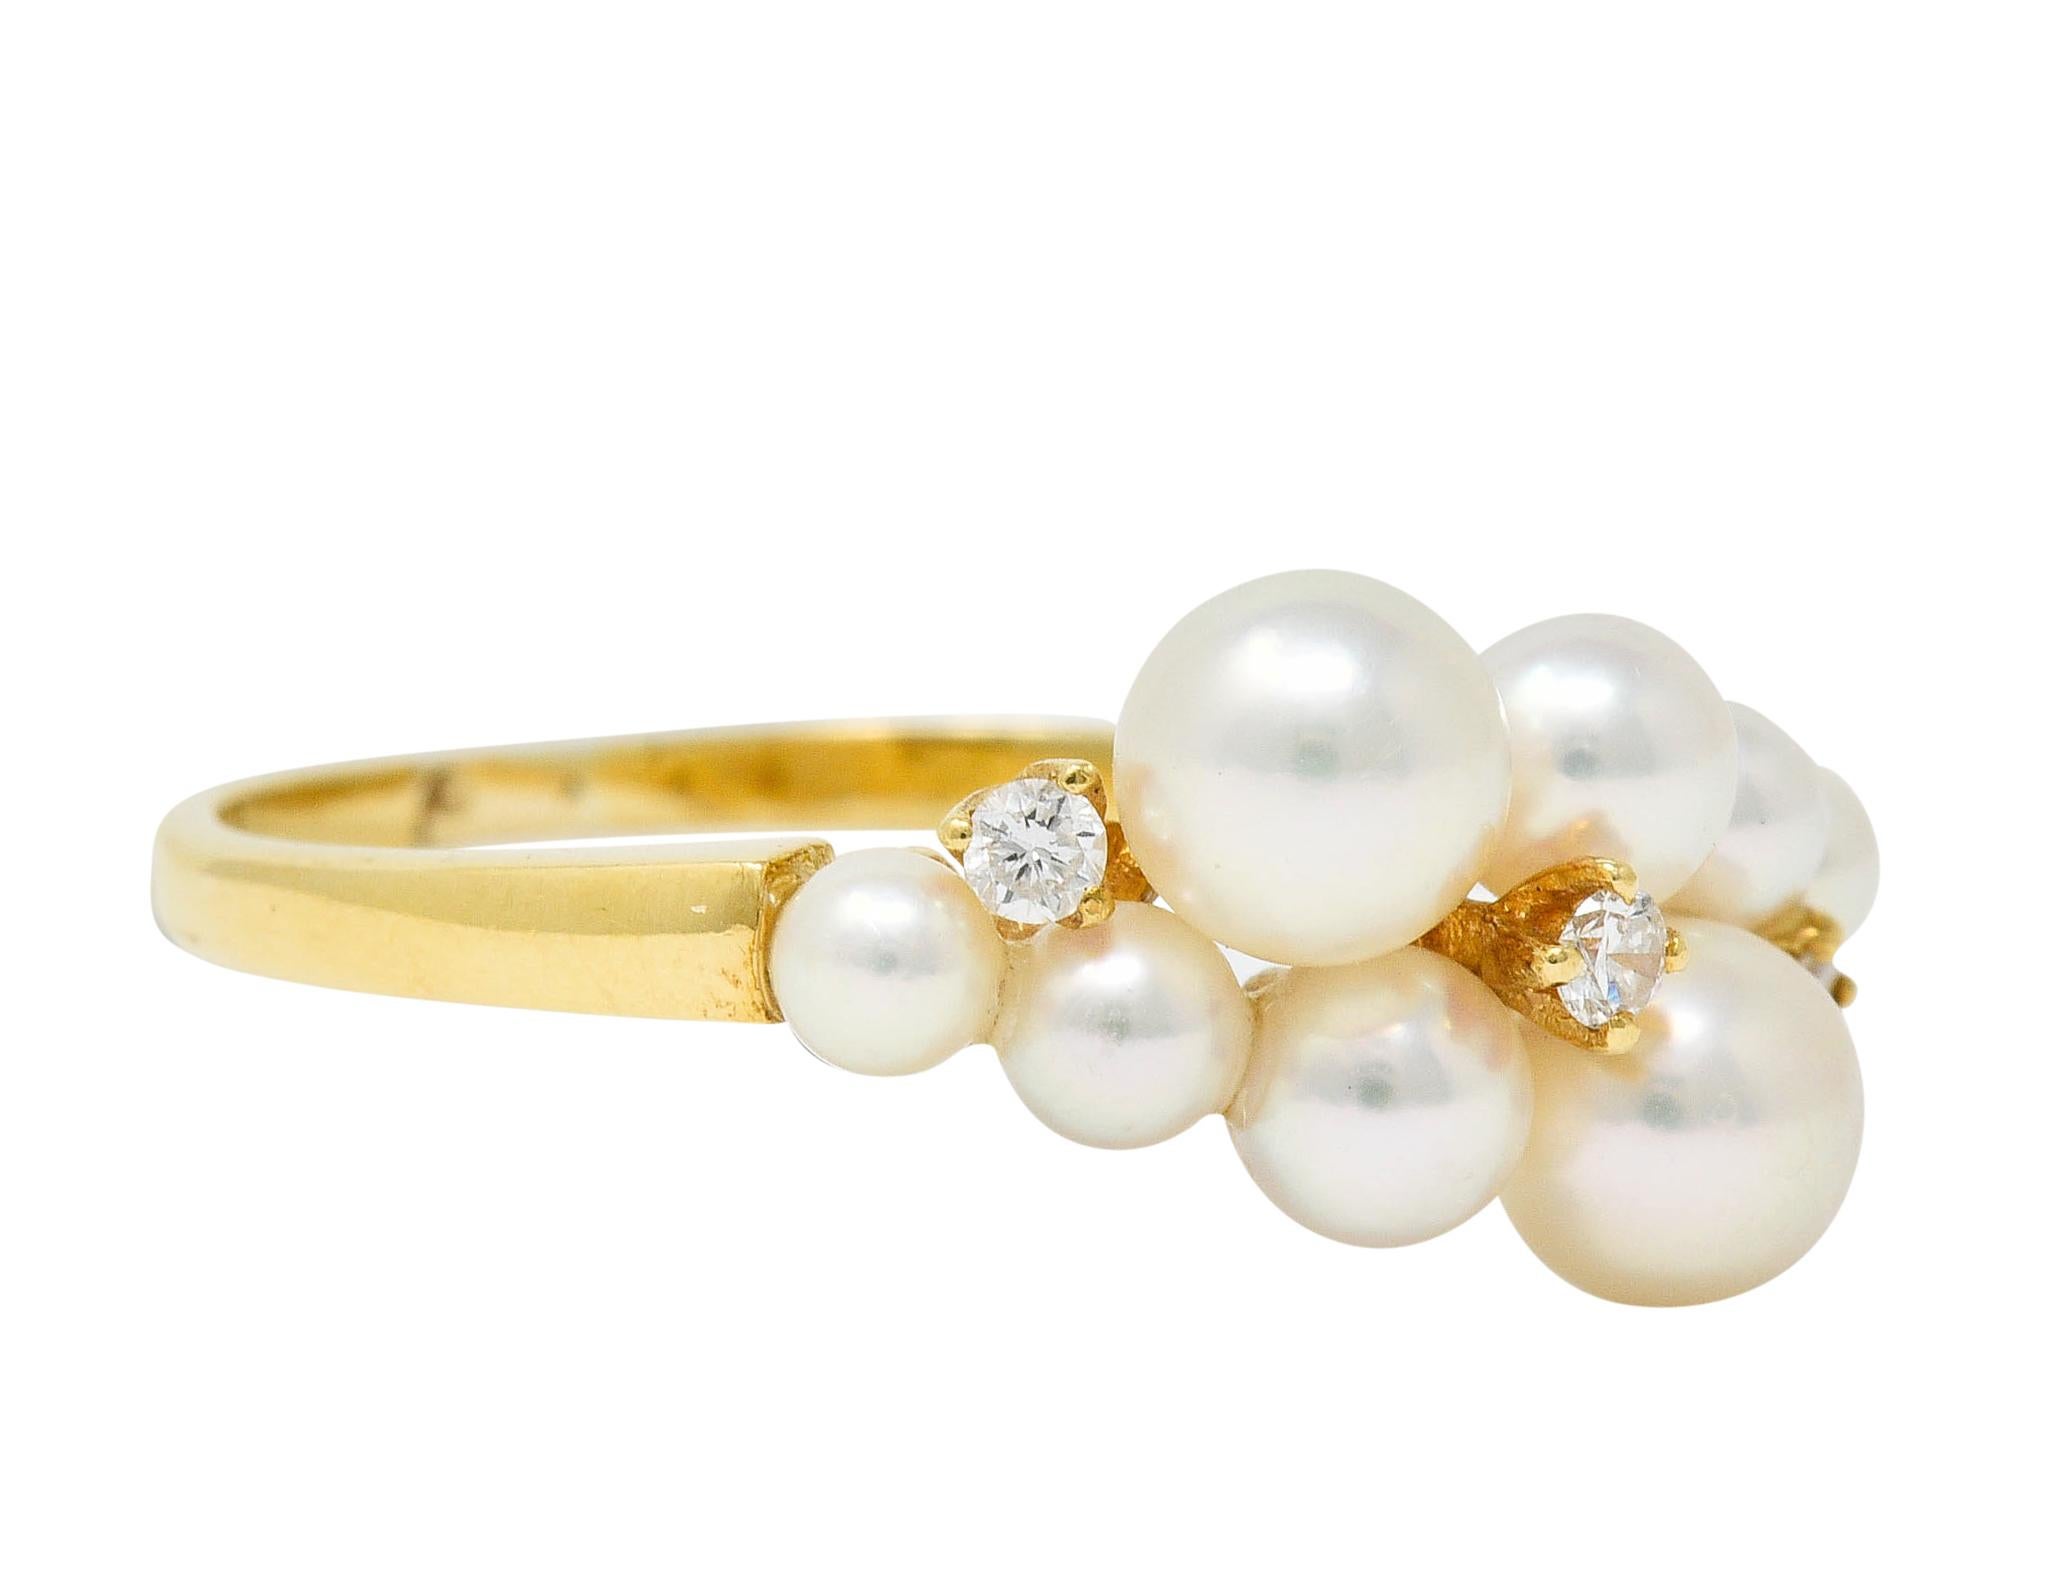 Band ring features a cluster of white cultured pearls with strong rosè overtones and excellent luster

Graduating in size from 4.8 mm to 2.8 mm

With three round brilliant cut diamond accents weighing in total approximately 0.06 carat

Maker's mark